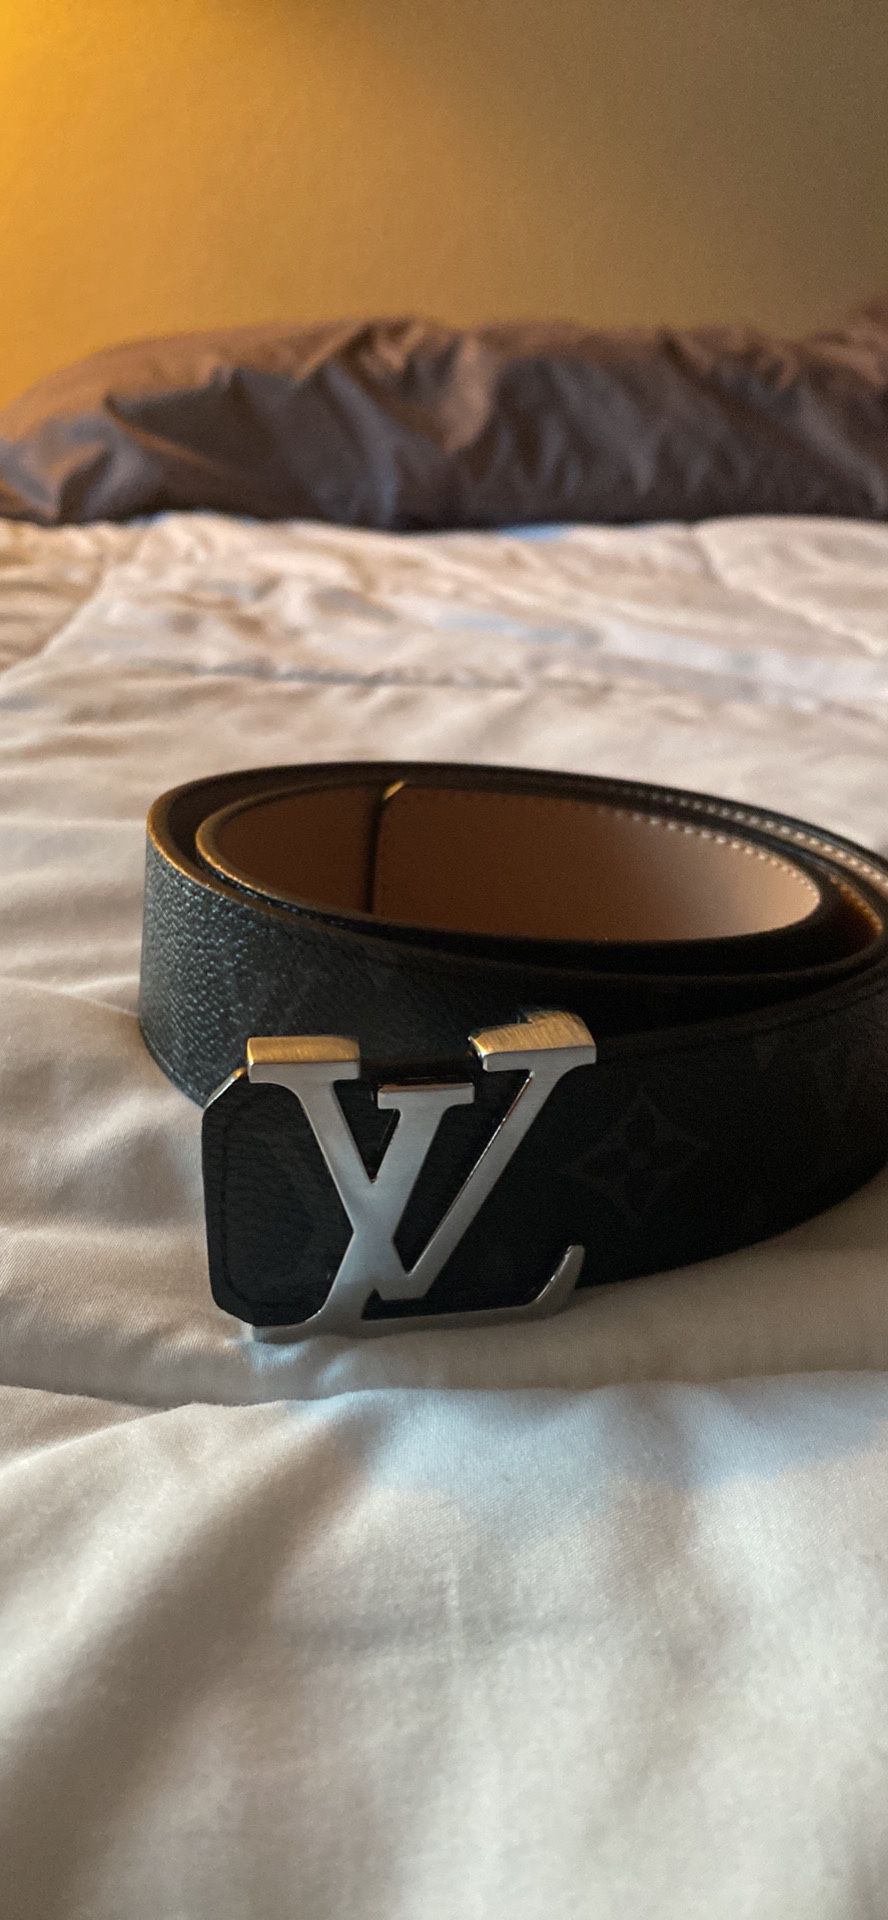 Louis Vuitton Belt Size 75/30 Fits If You Are A Size Small Or Xsmall Jean  Size 0 Or 1,3 for Sale in San Jose, CA - OfferUp